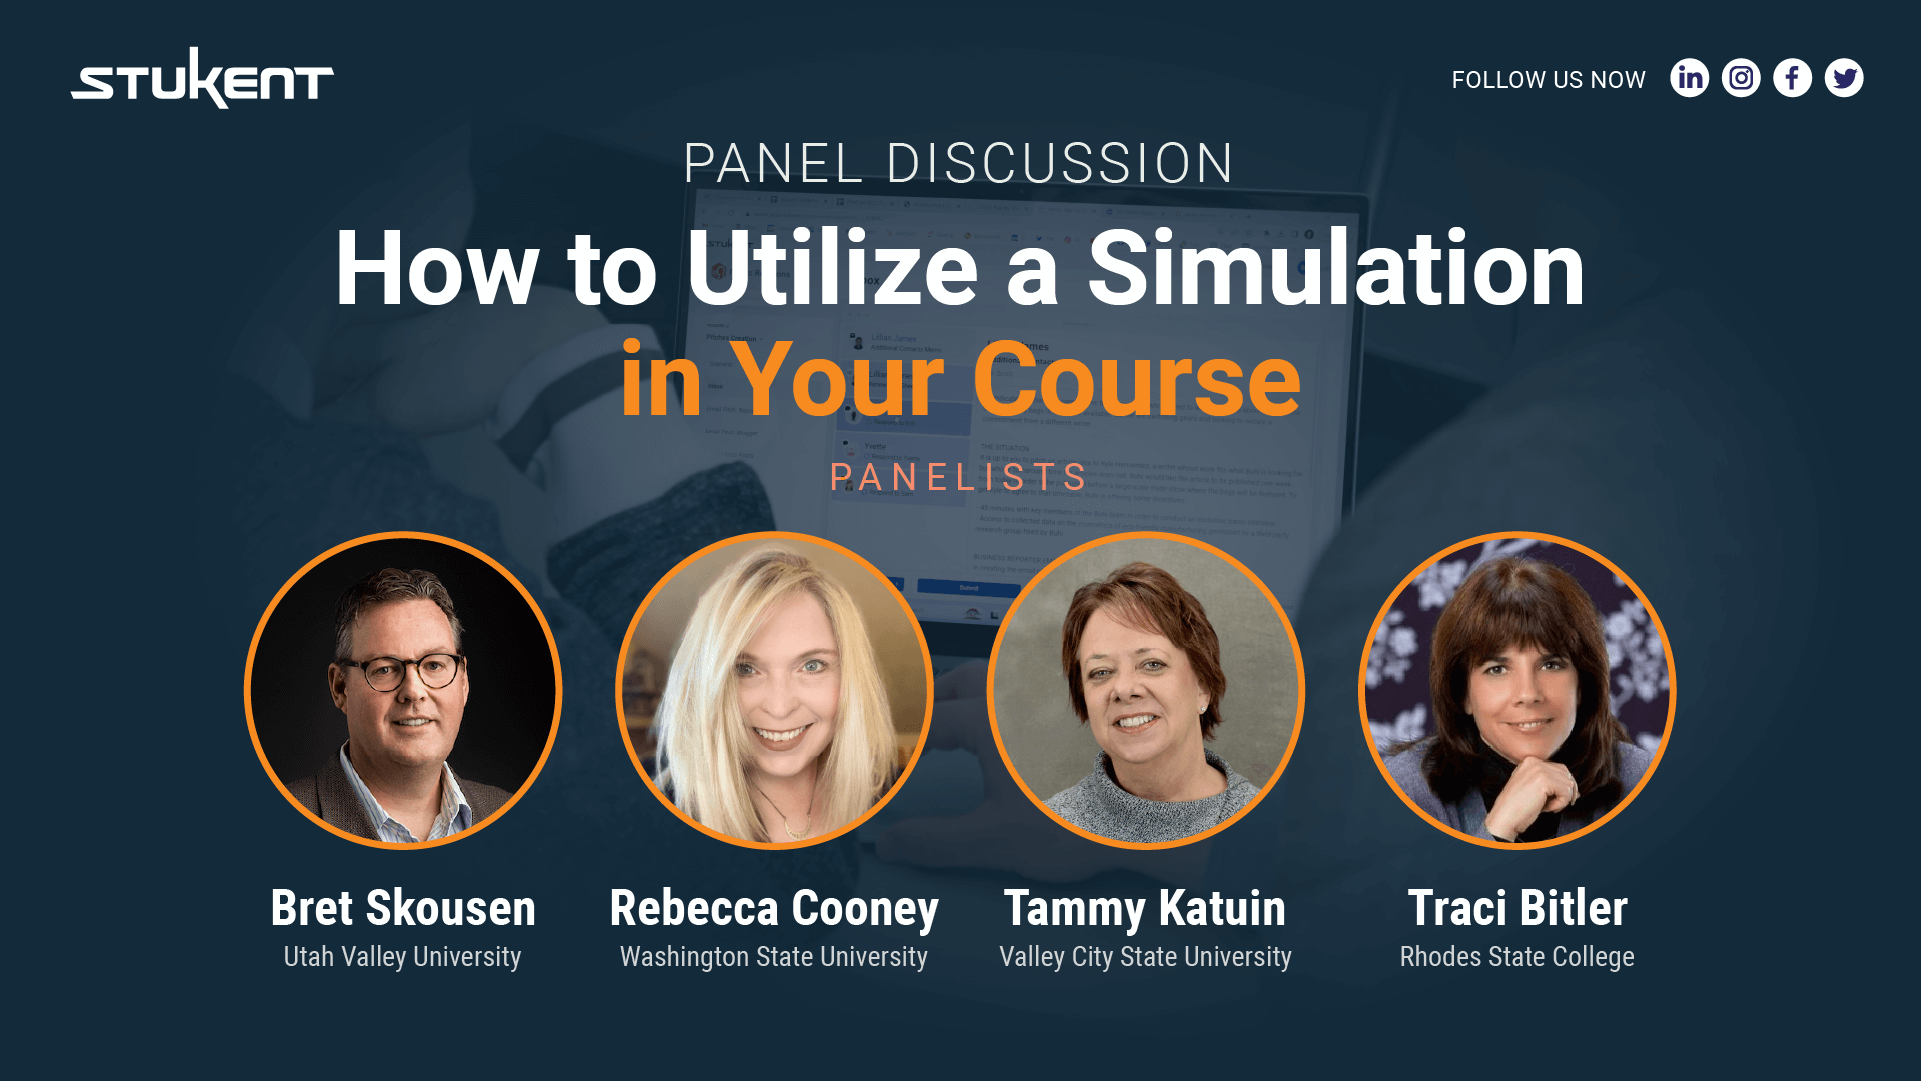 How to Utilize a Simulation in Your Course